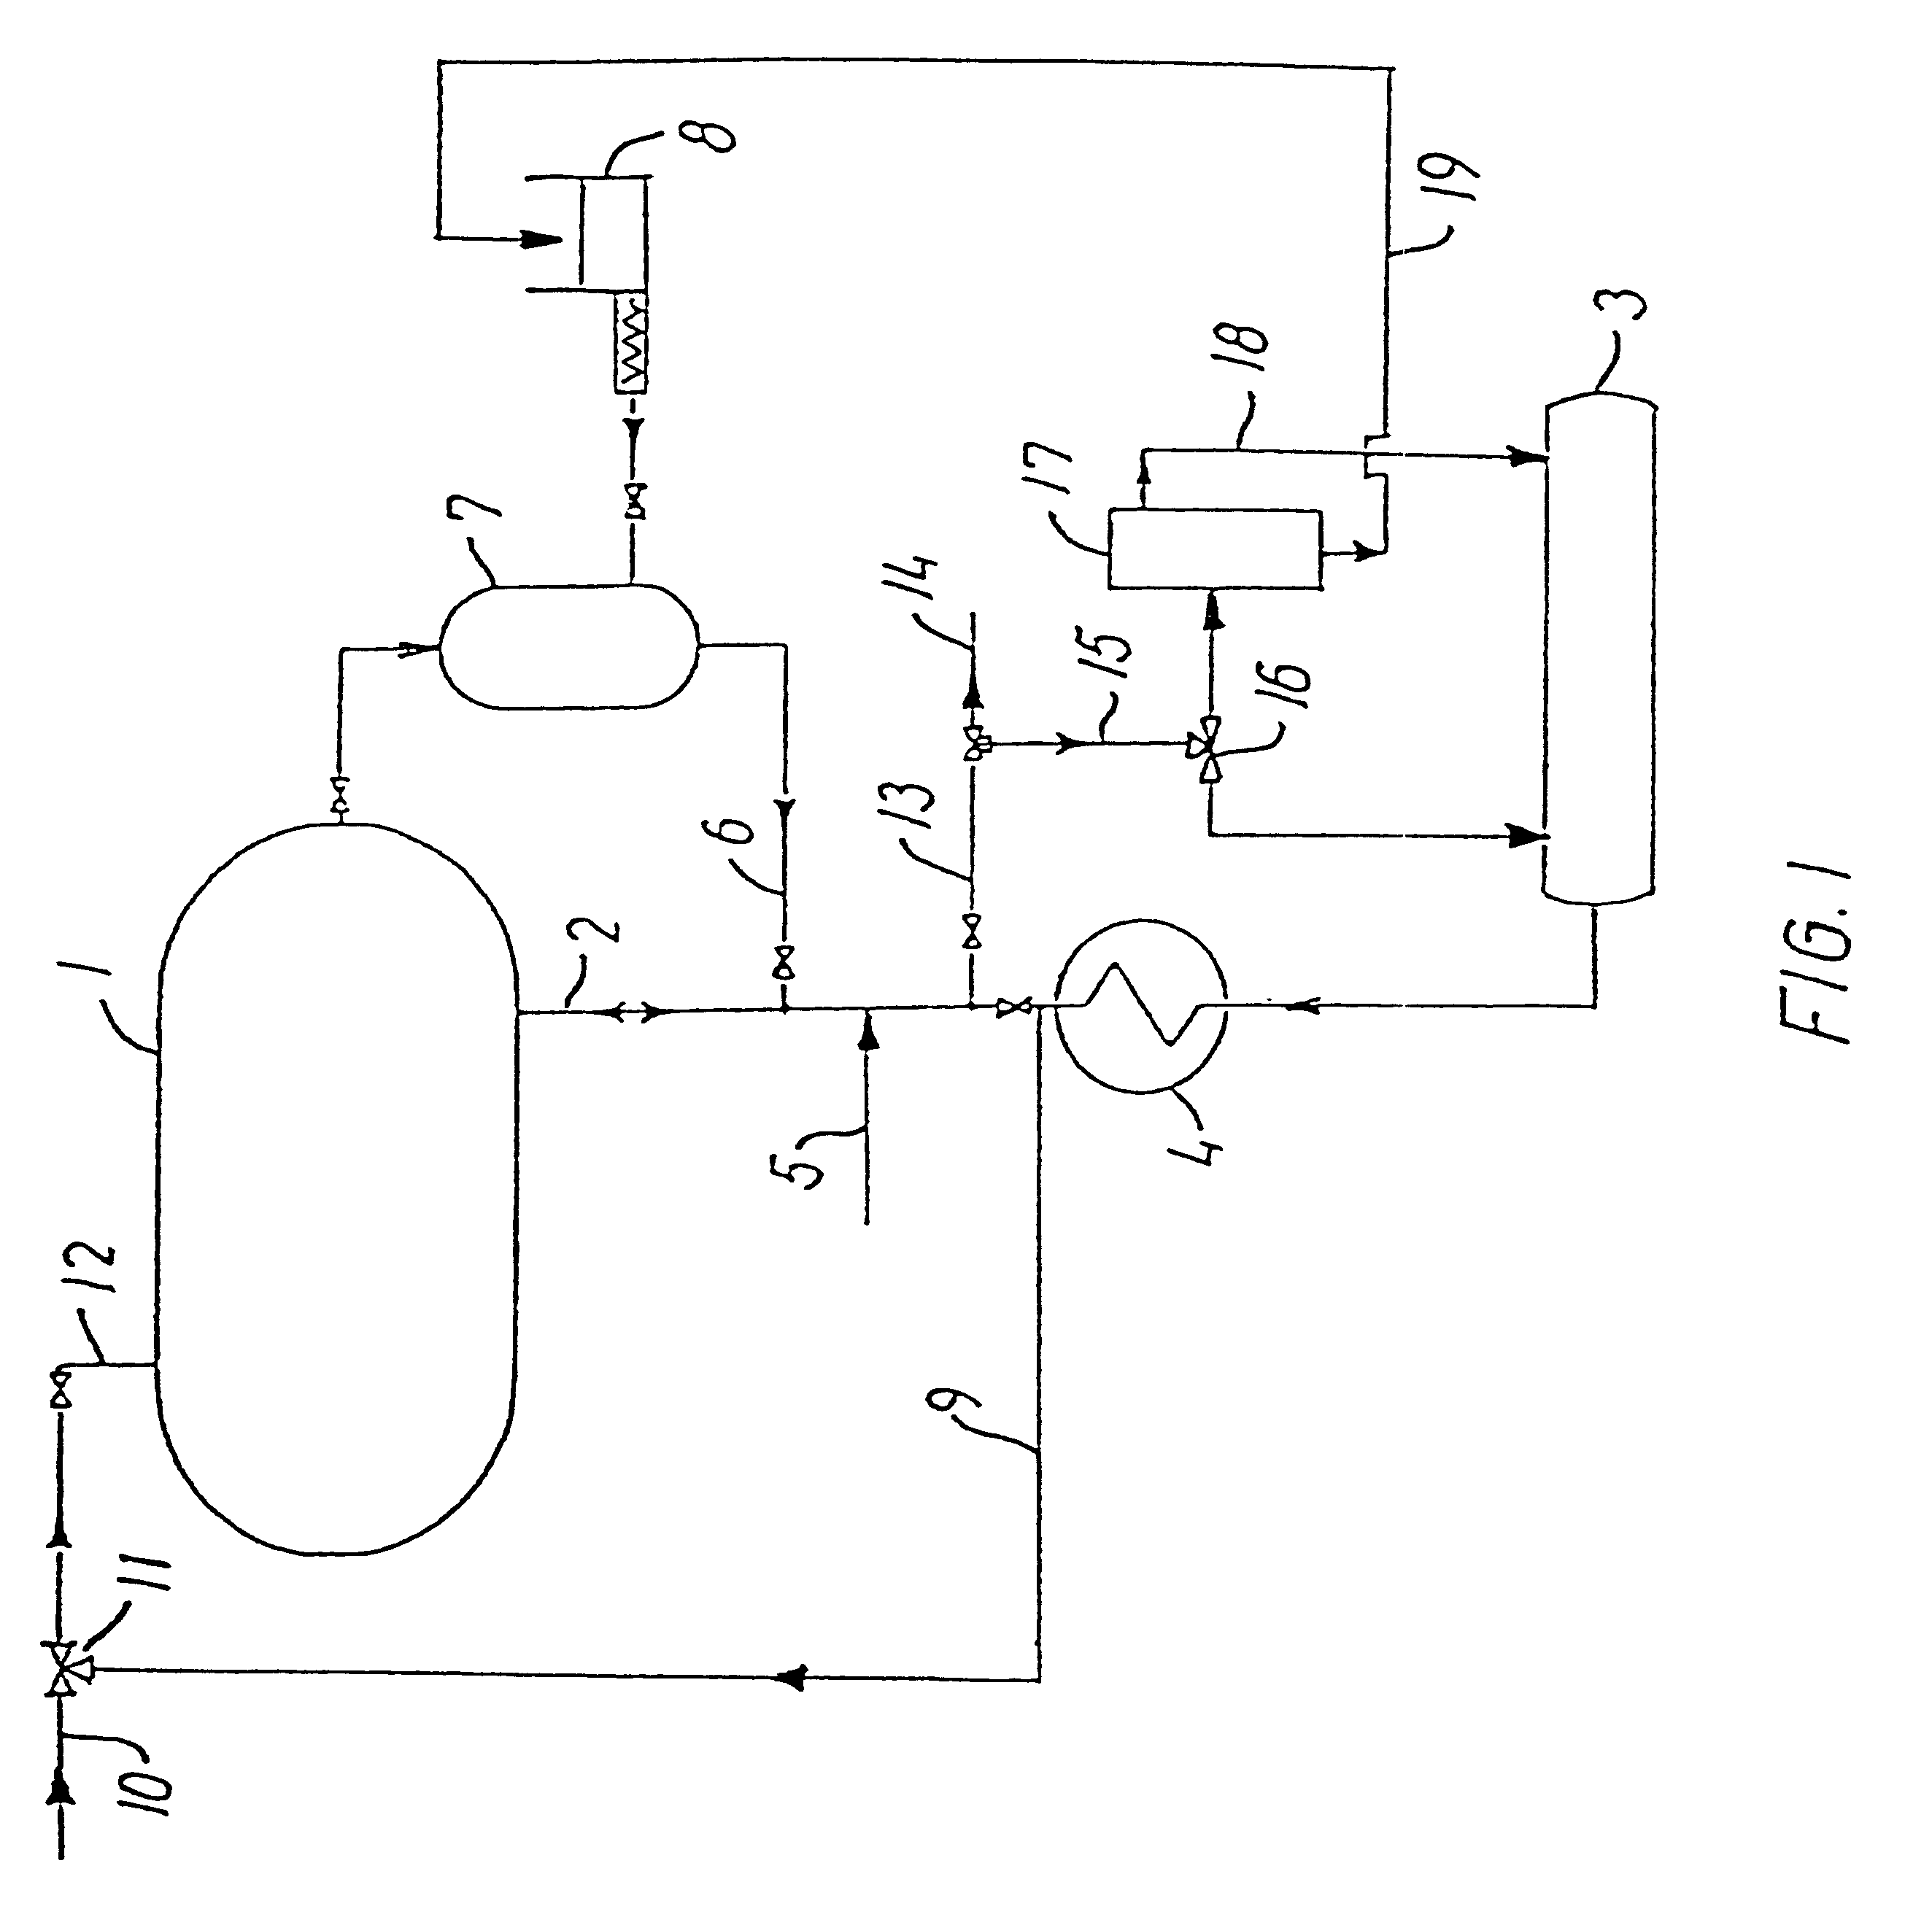 Method of performing an impregnating or extracting treatment on a resin-containing wood substrate